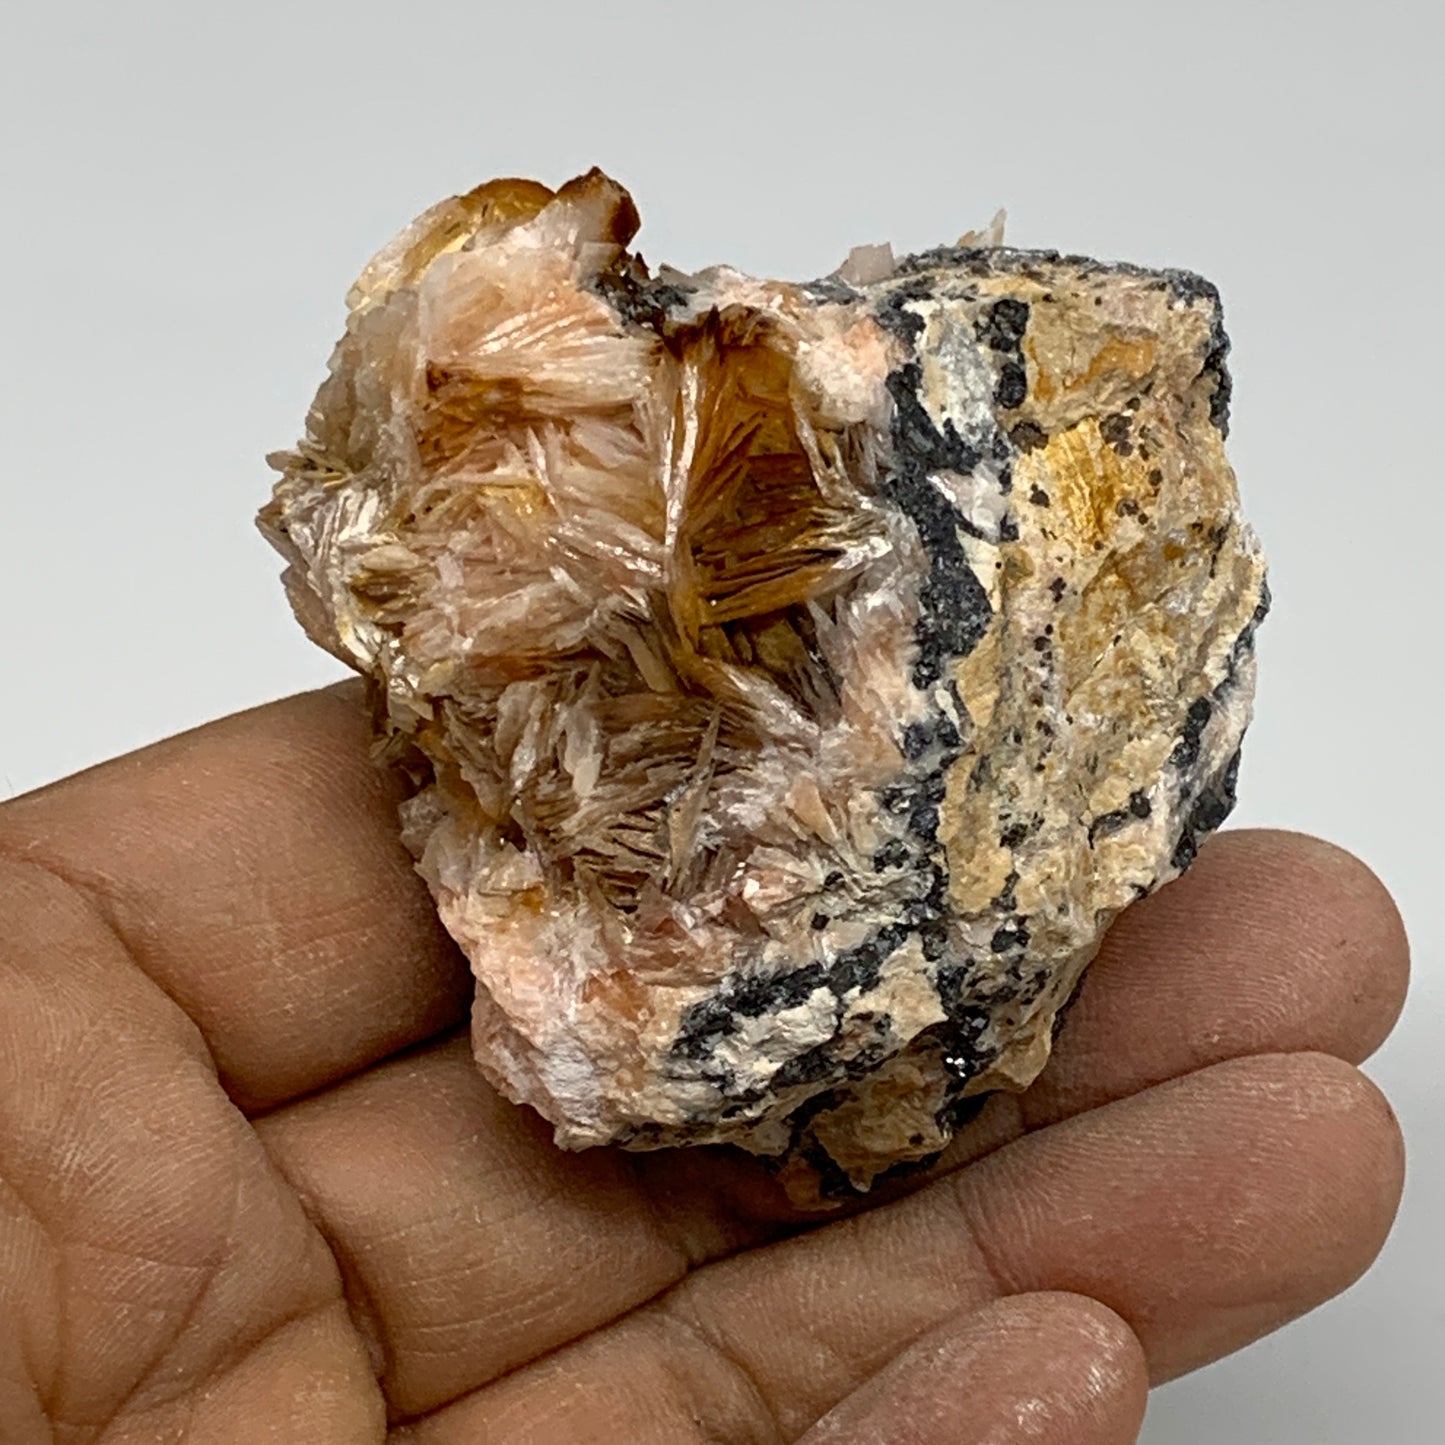 0.29 lbs, 2.1"x2.2"x1.4", Barite with Cerussite on Galena Mineral Specimen, B33514